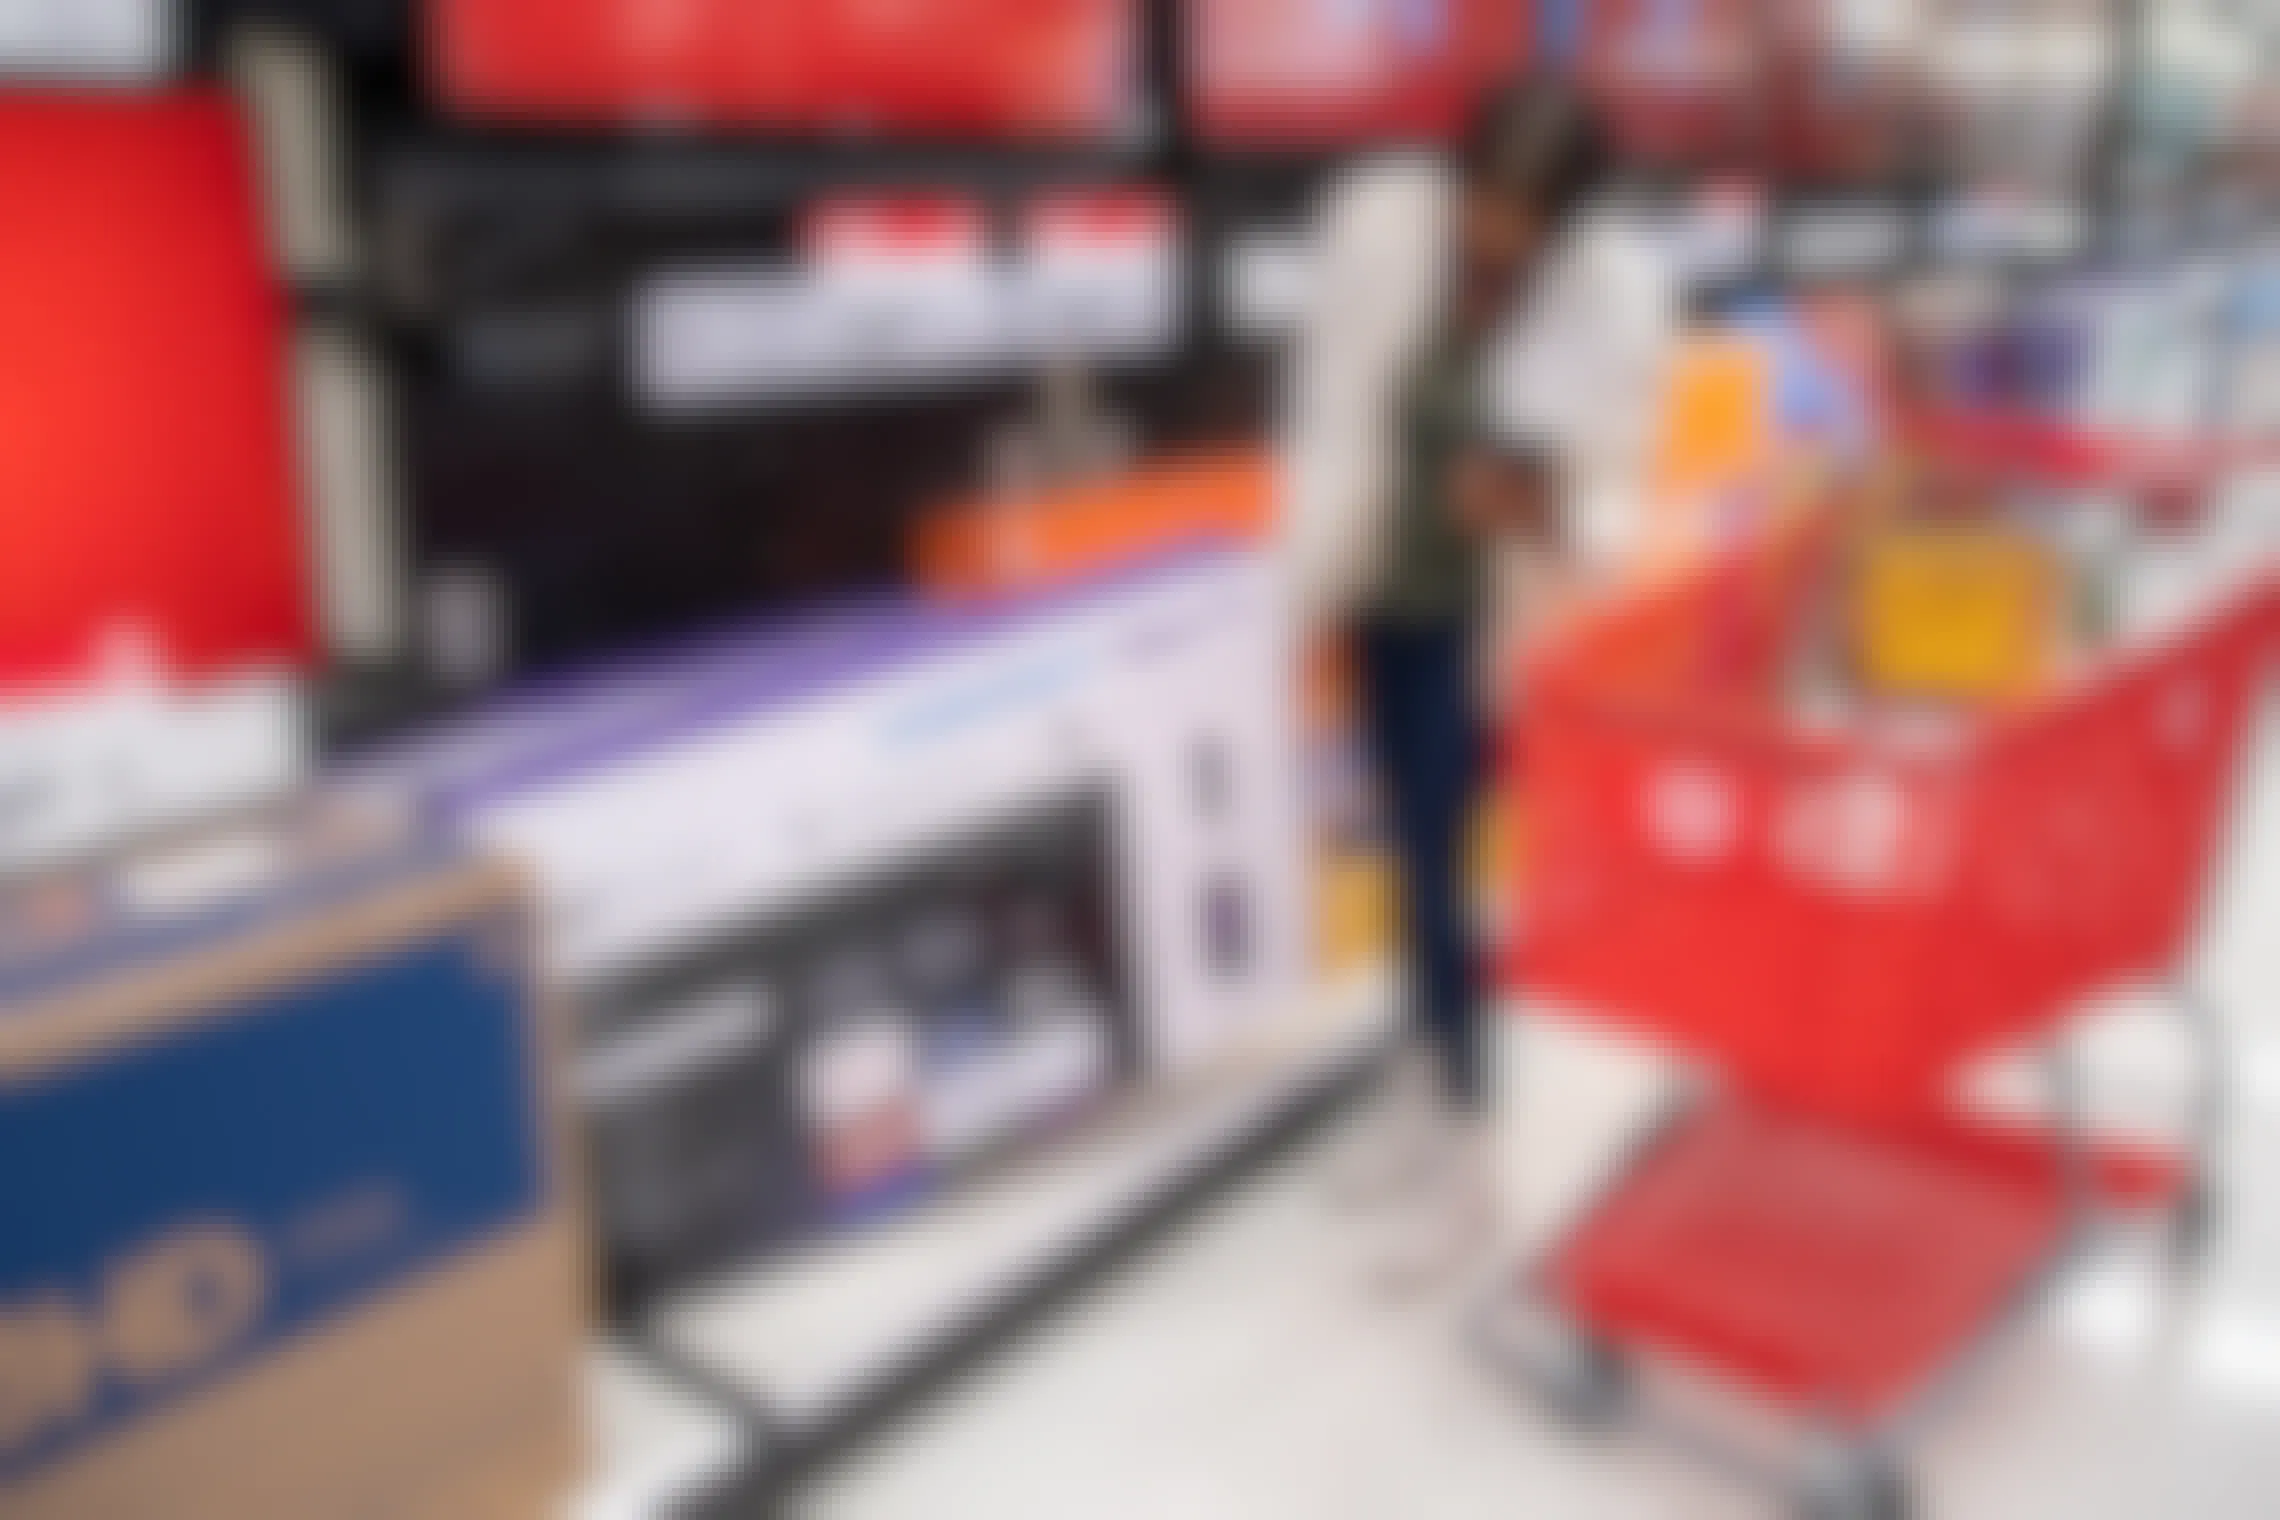 A woman looking at a tv inside Target